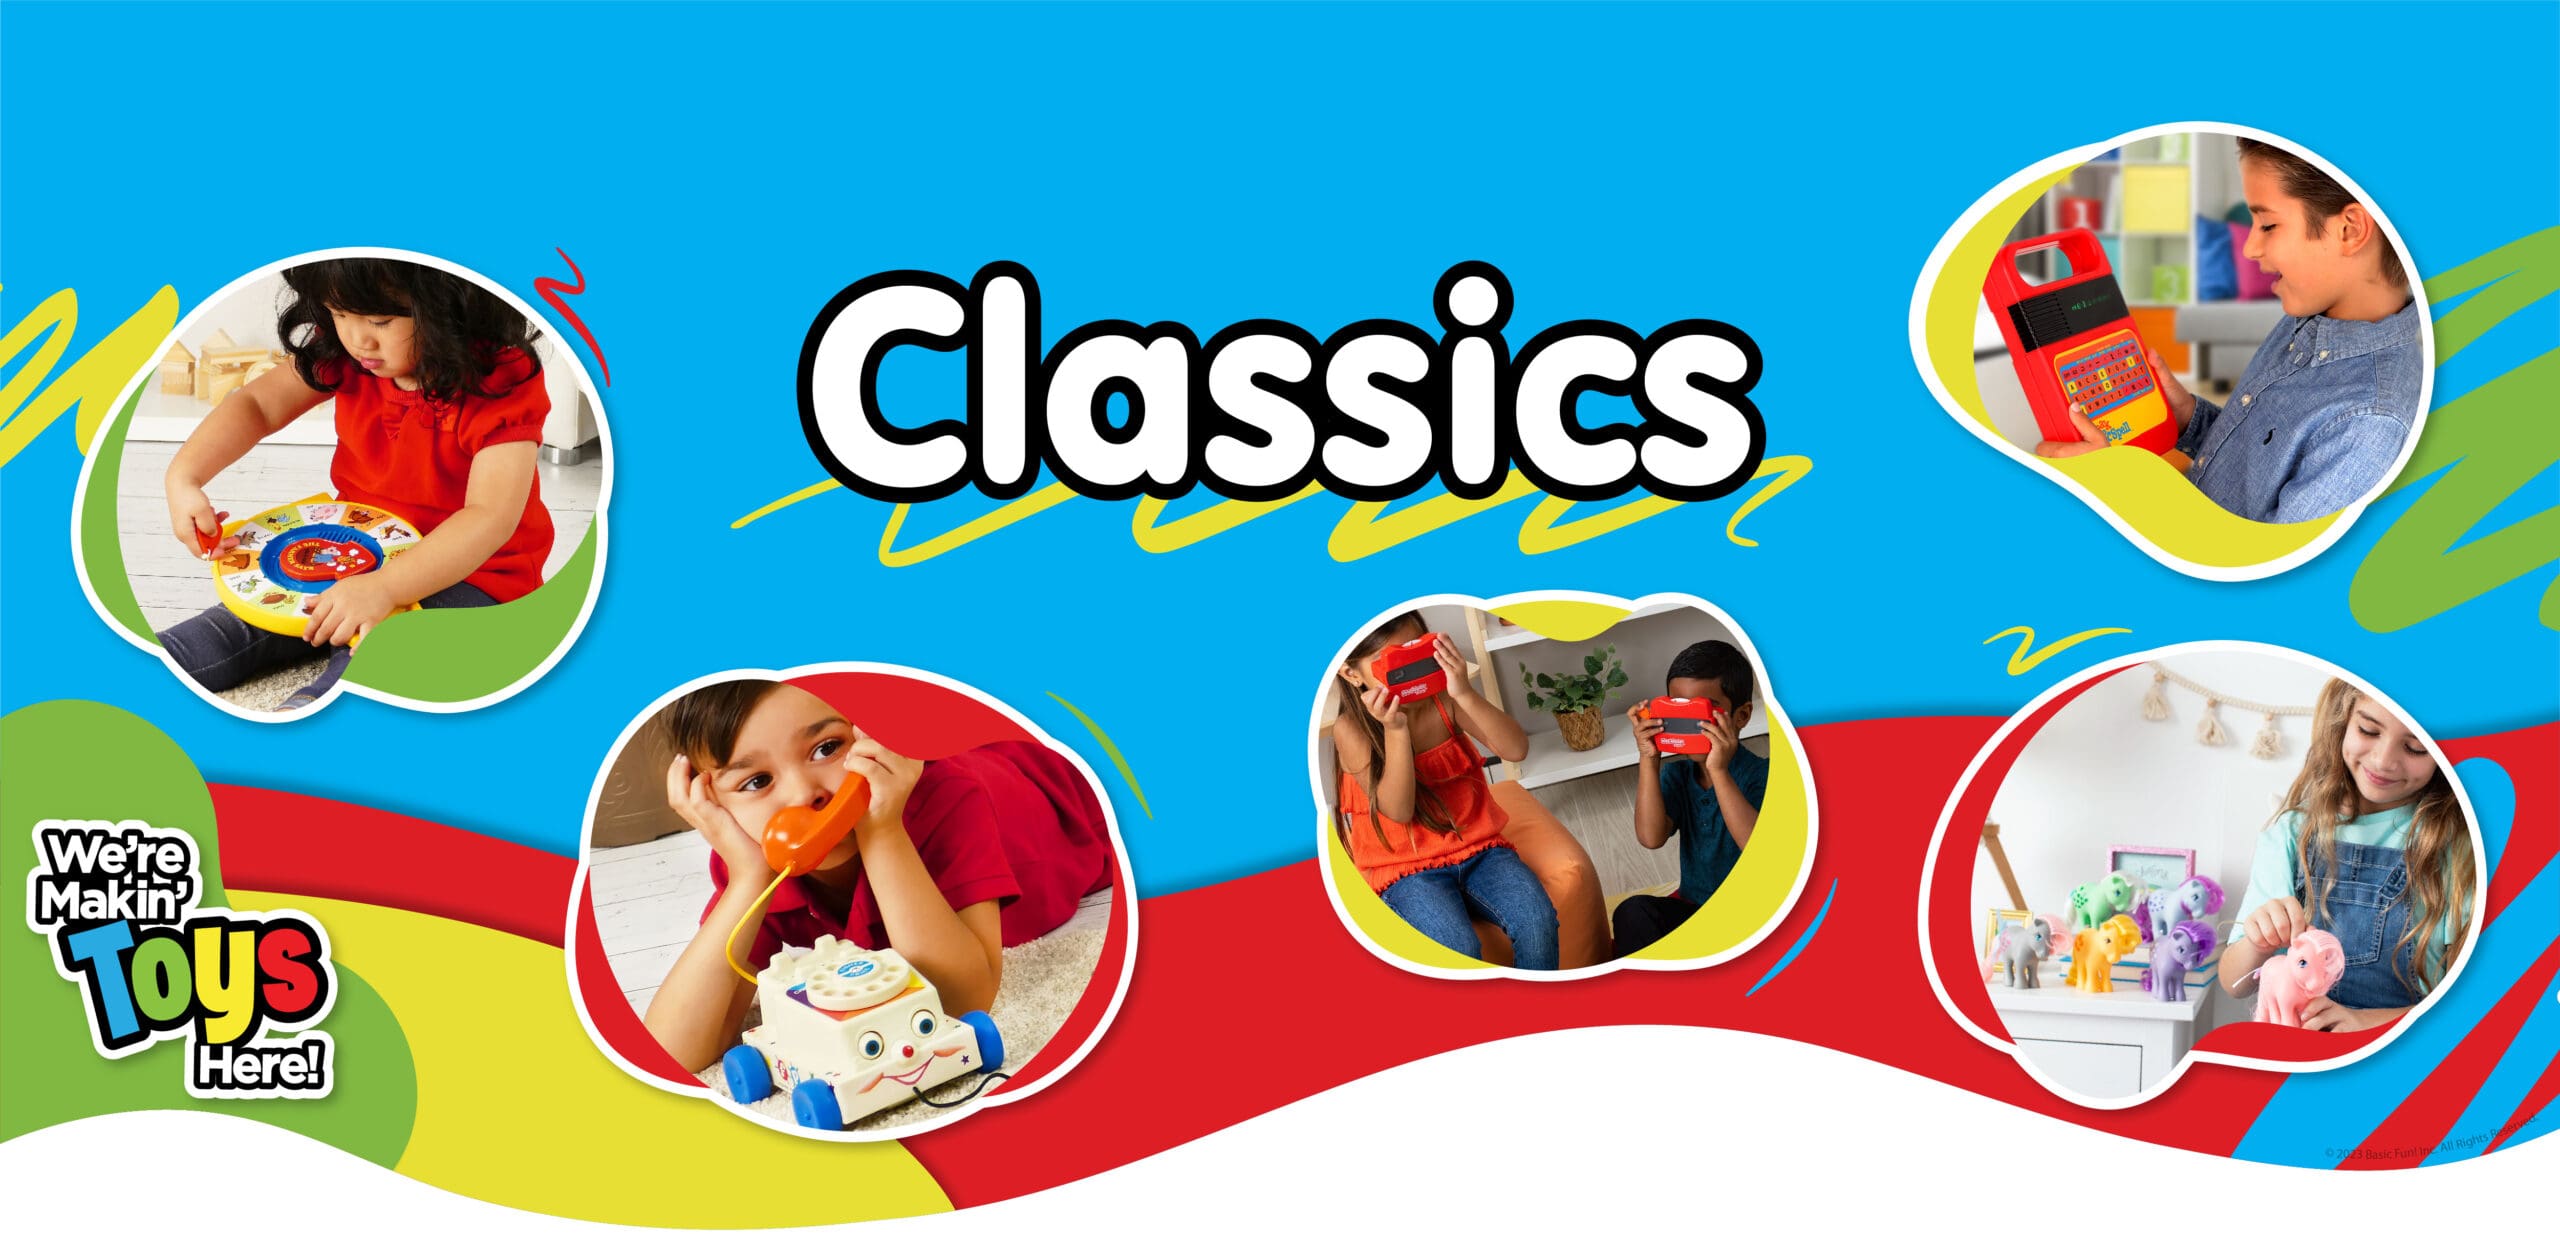 Classics banner featuring kids playing with toys